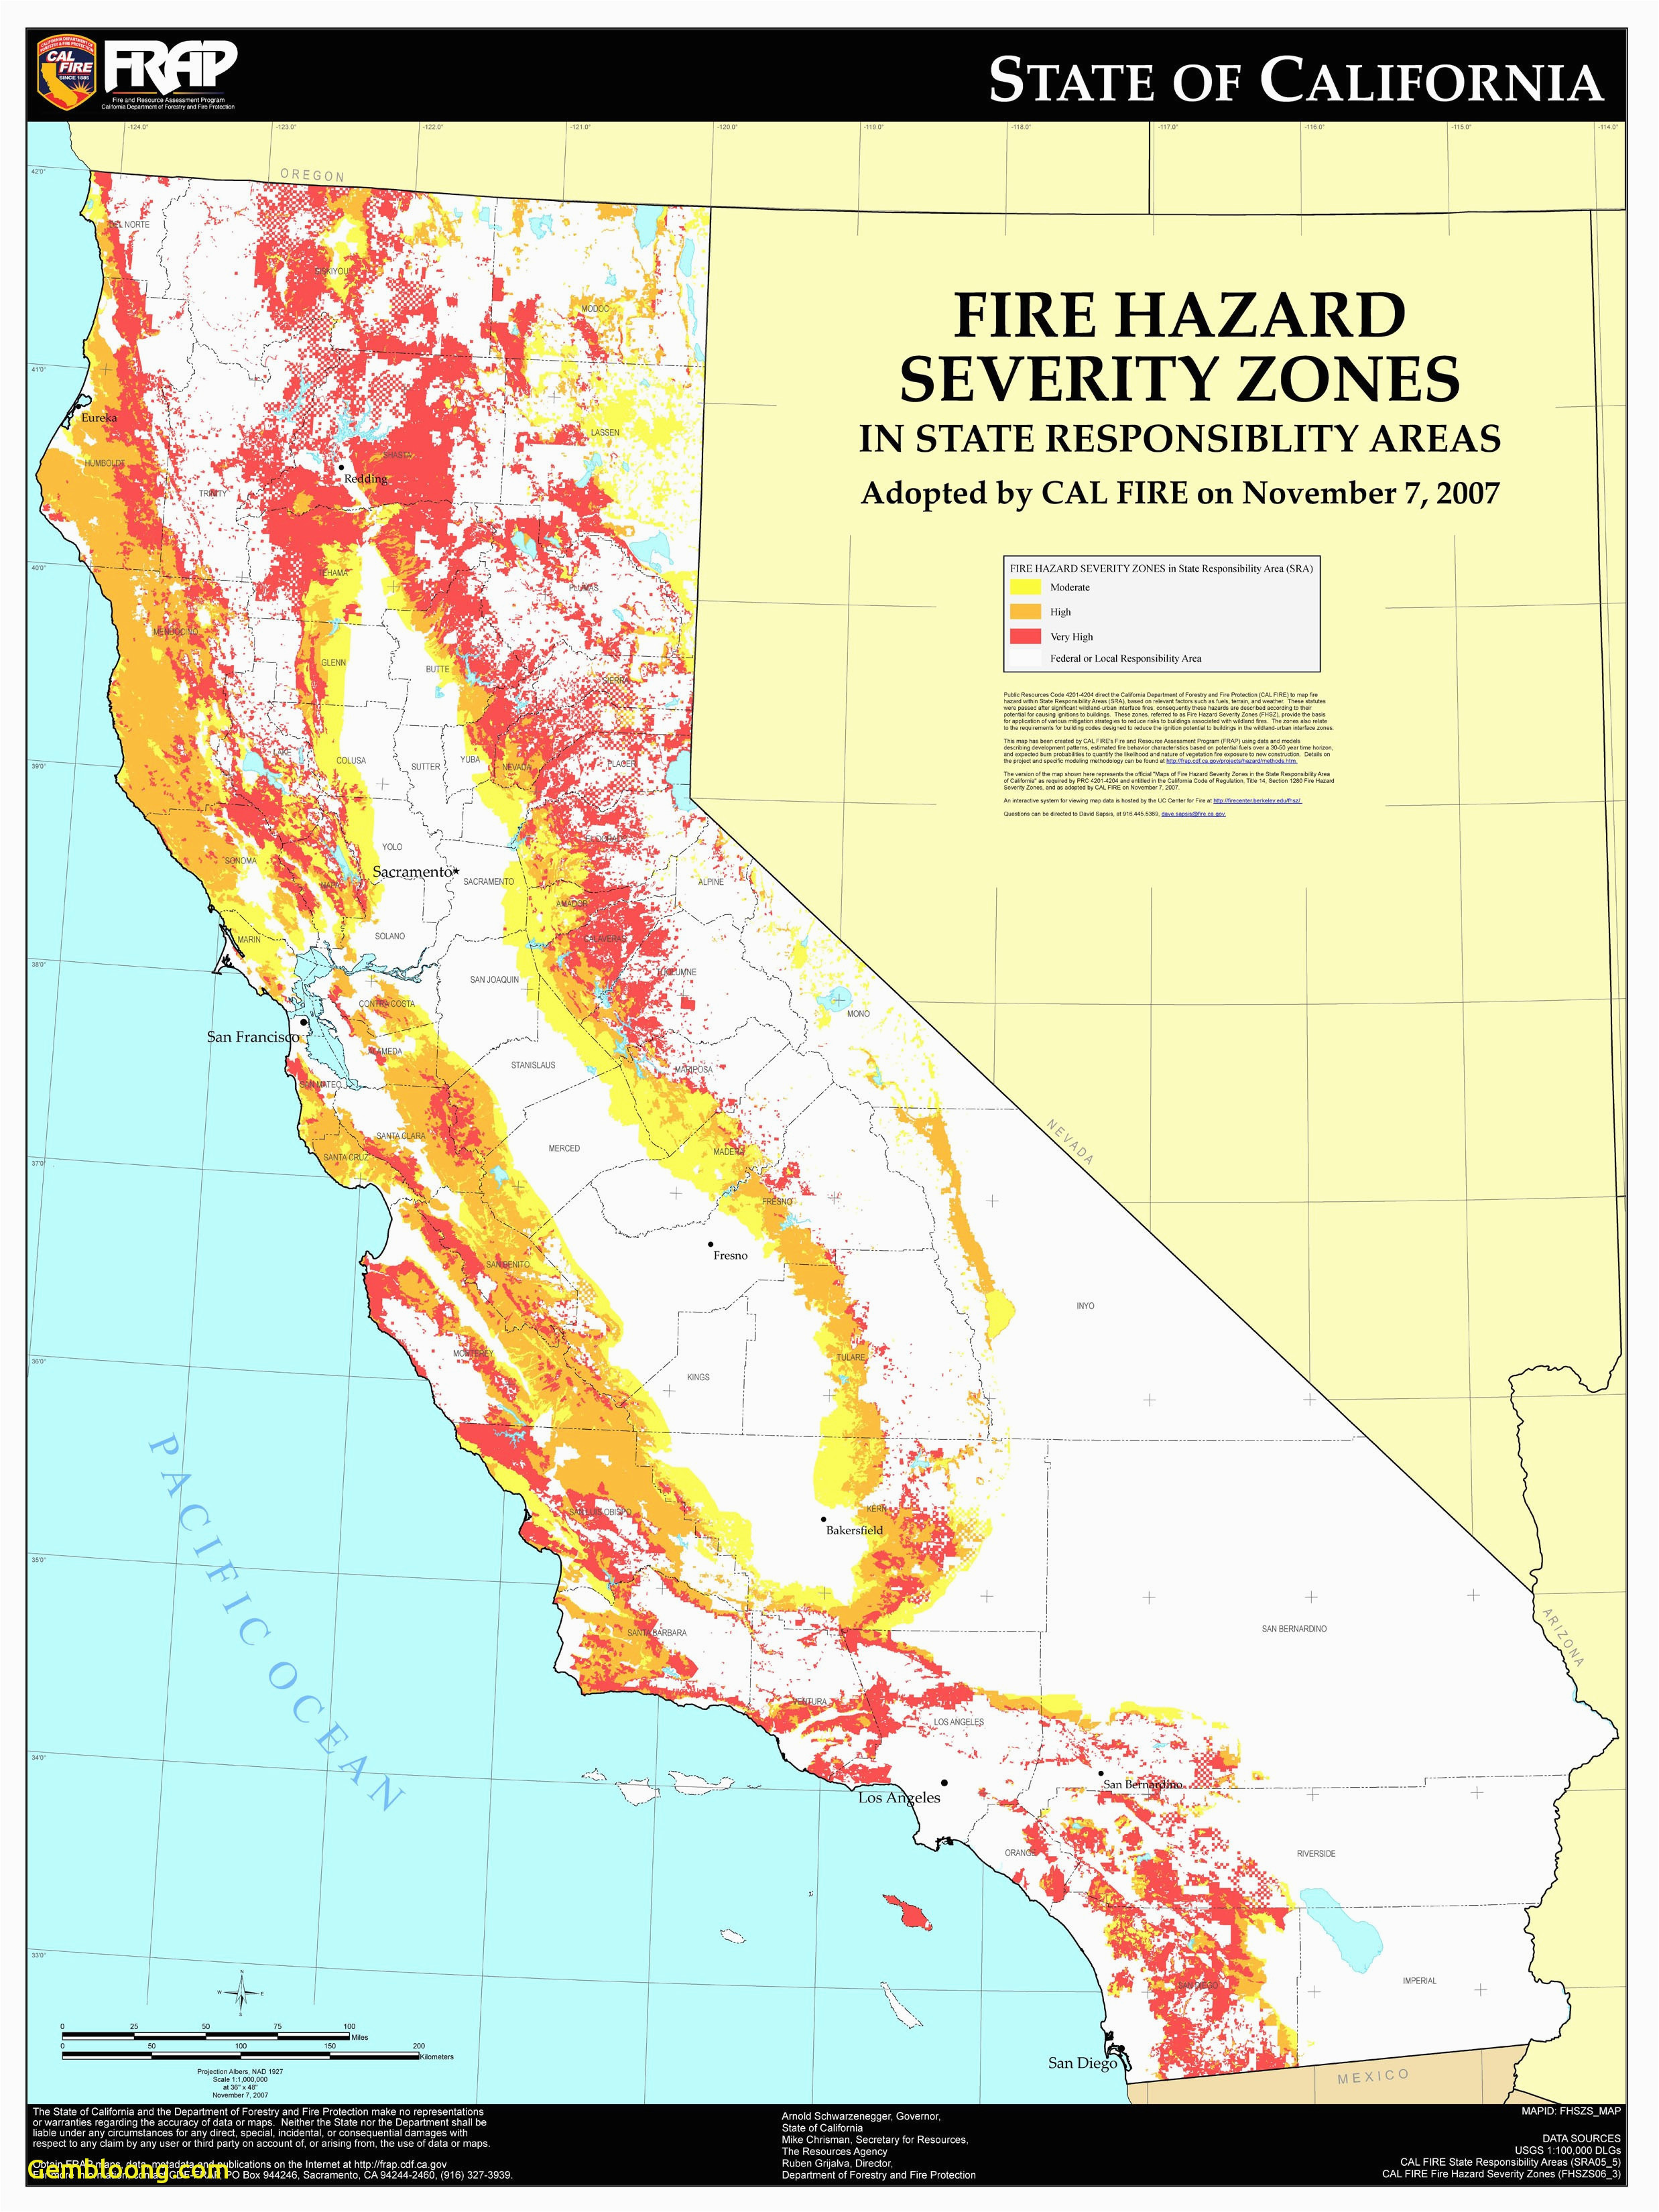 map of current california wildfires best of od gallery website